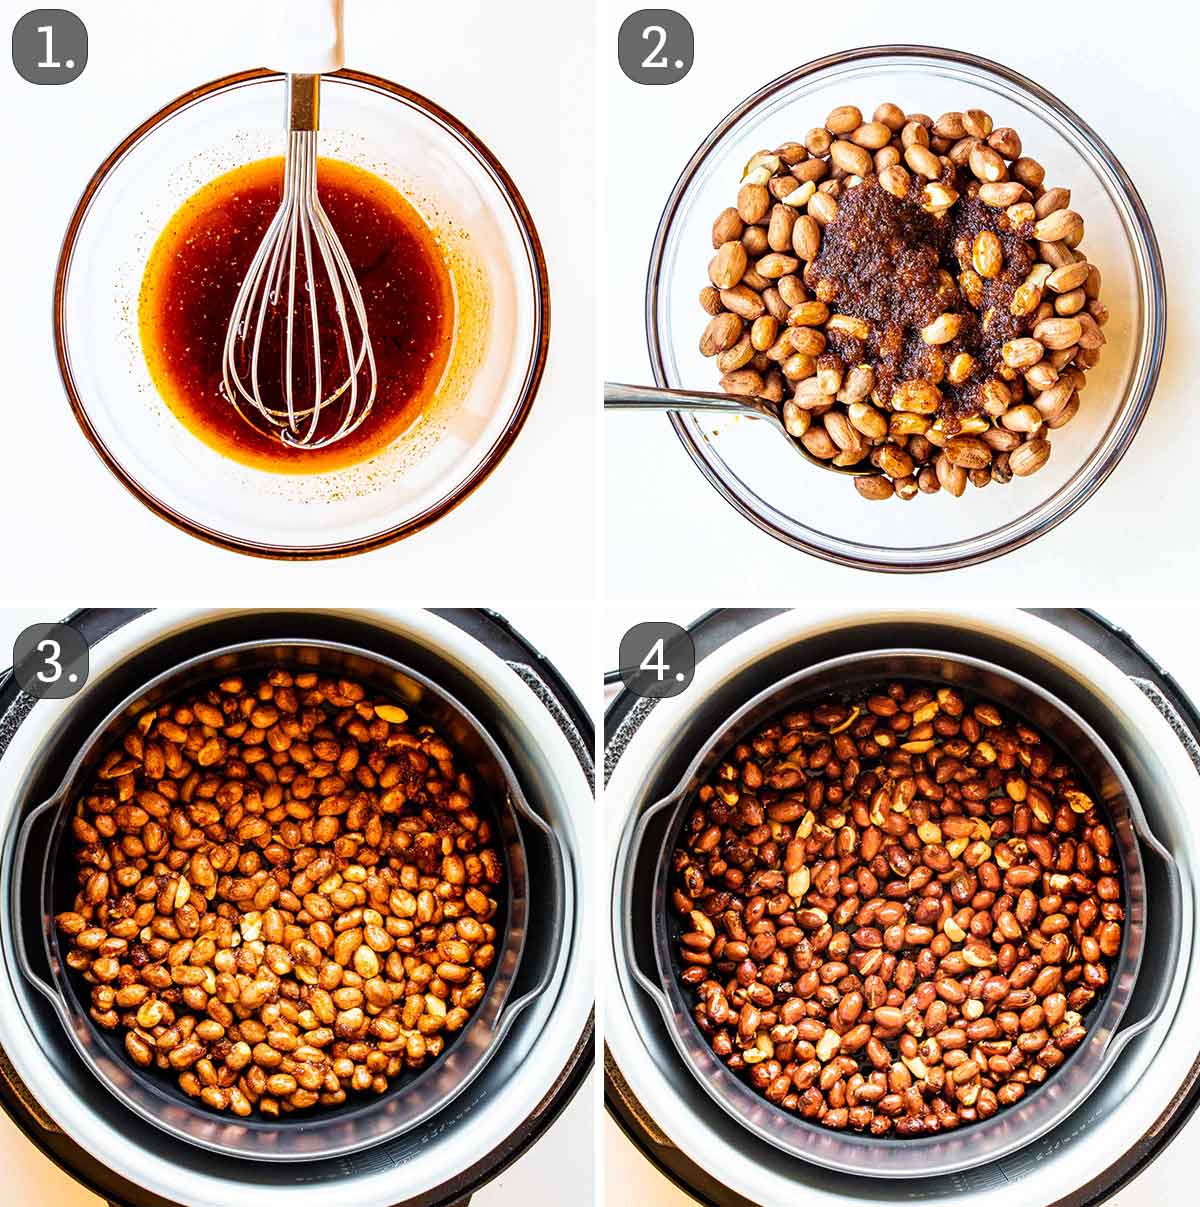 detailed process shots showing how to roast peanuts in the air fryer.